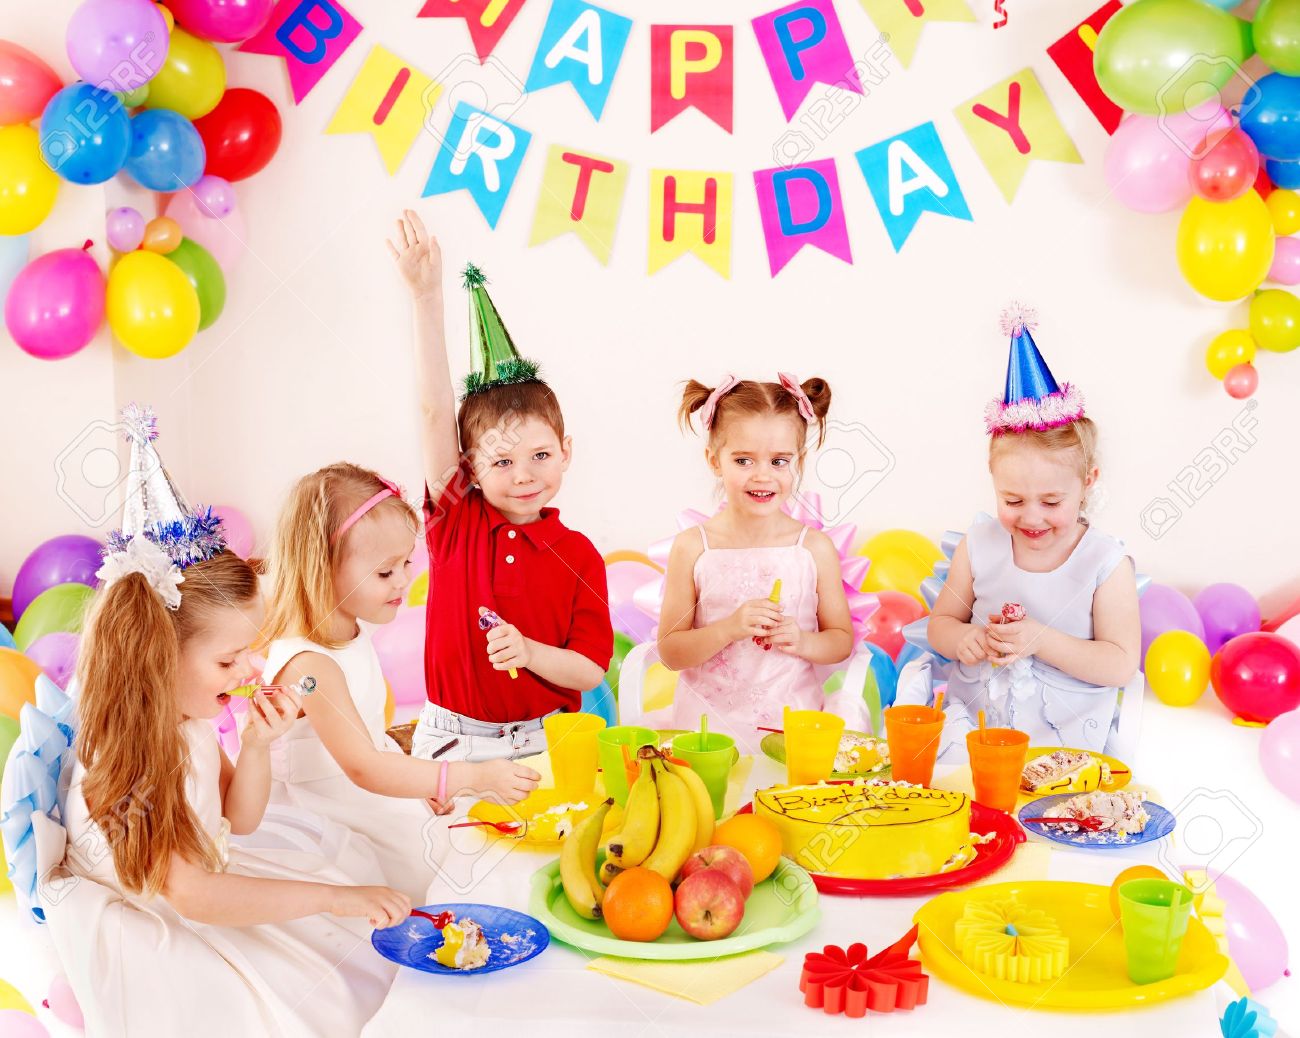 Lovely and Meaningful Birthday Toasts to Bring Happiness to Everyone 1